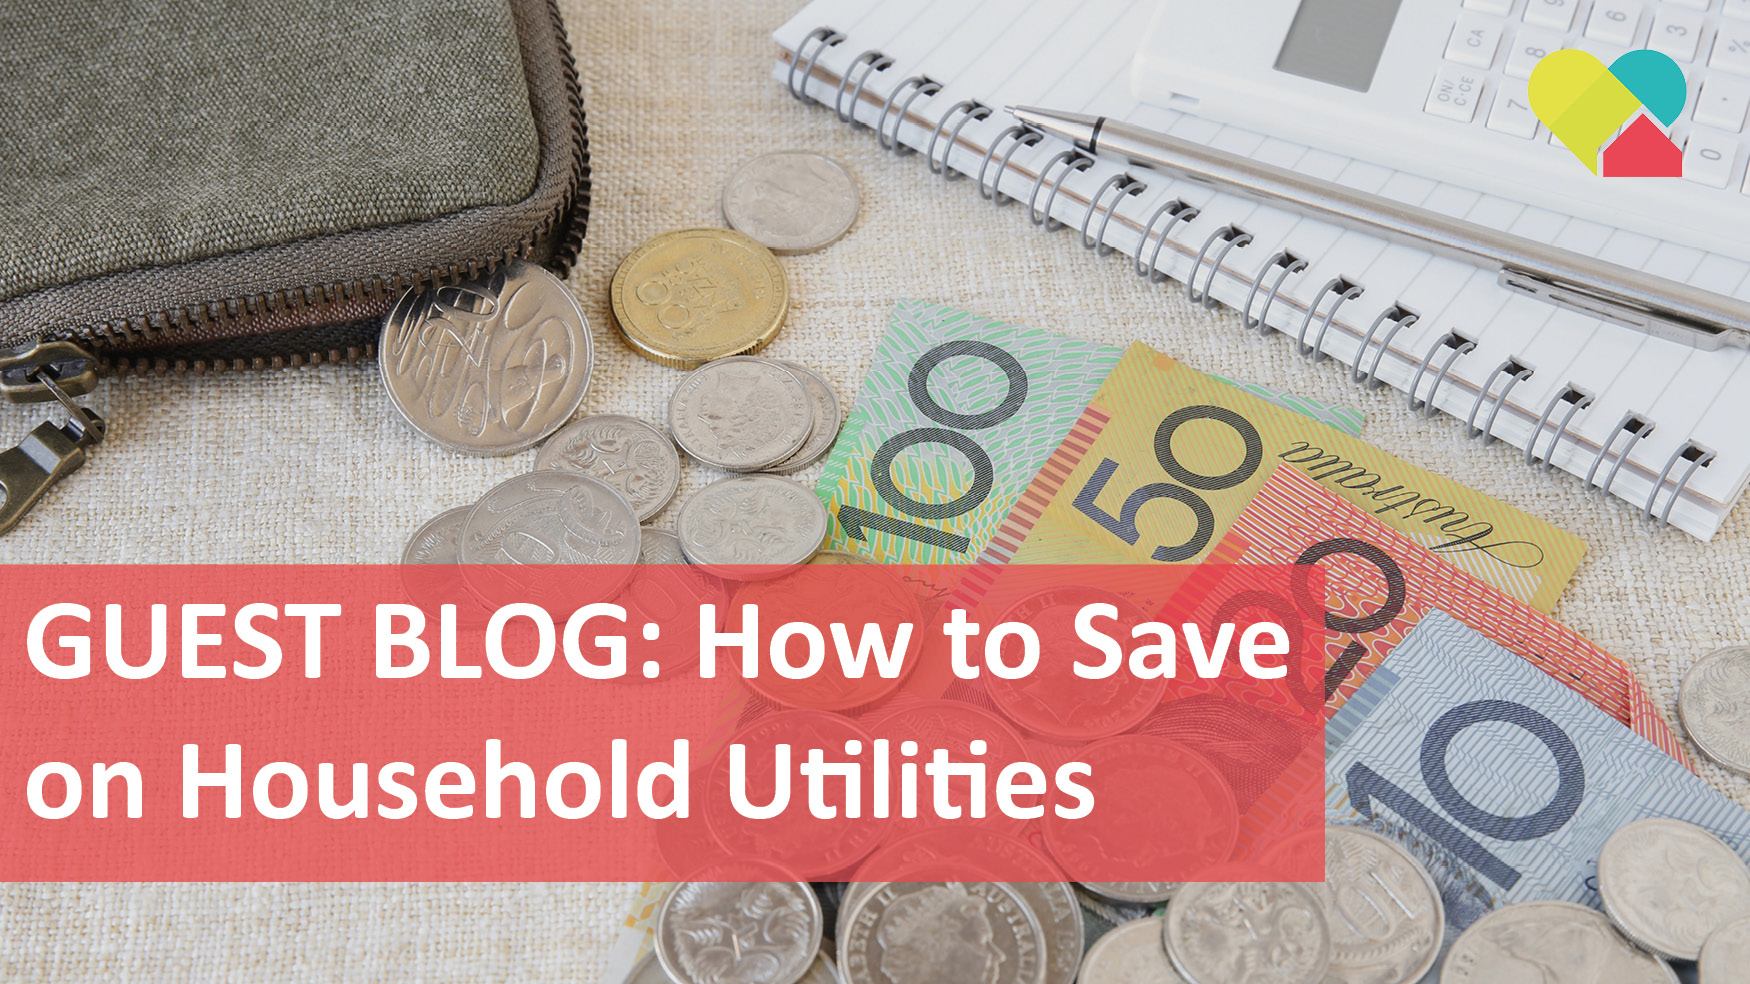 How to Save on Household Utilities